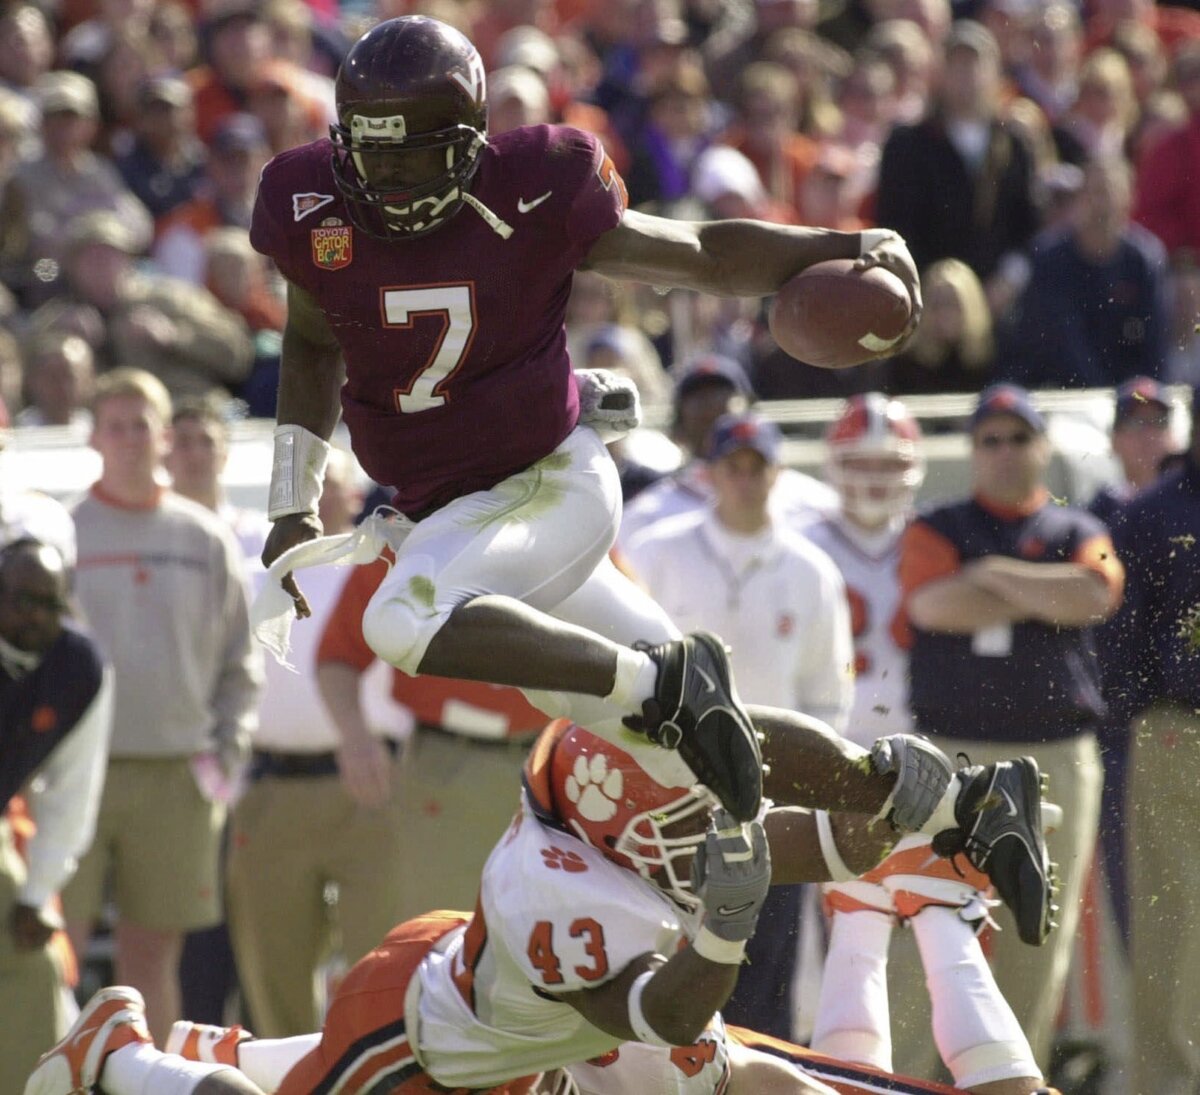 Vick Fitzgerald And Suggs Among Stars On College Football Hall Of Fame Ballot For 1st Time 